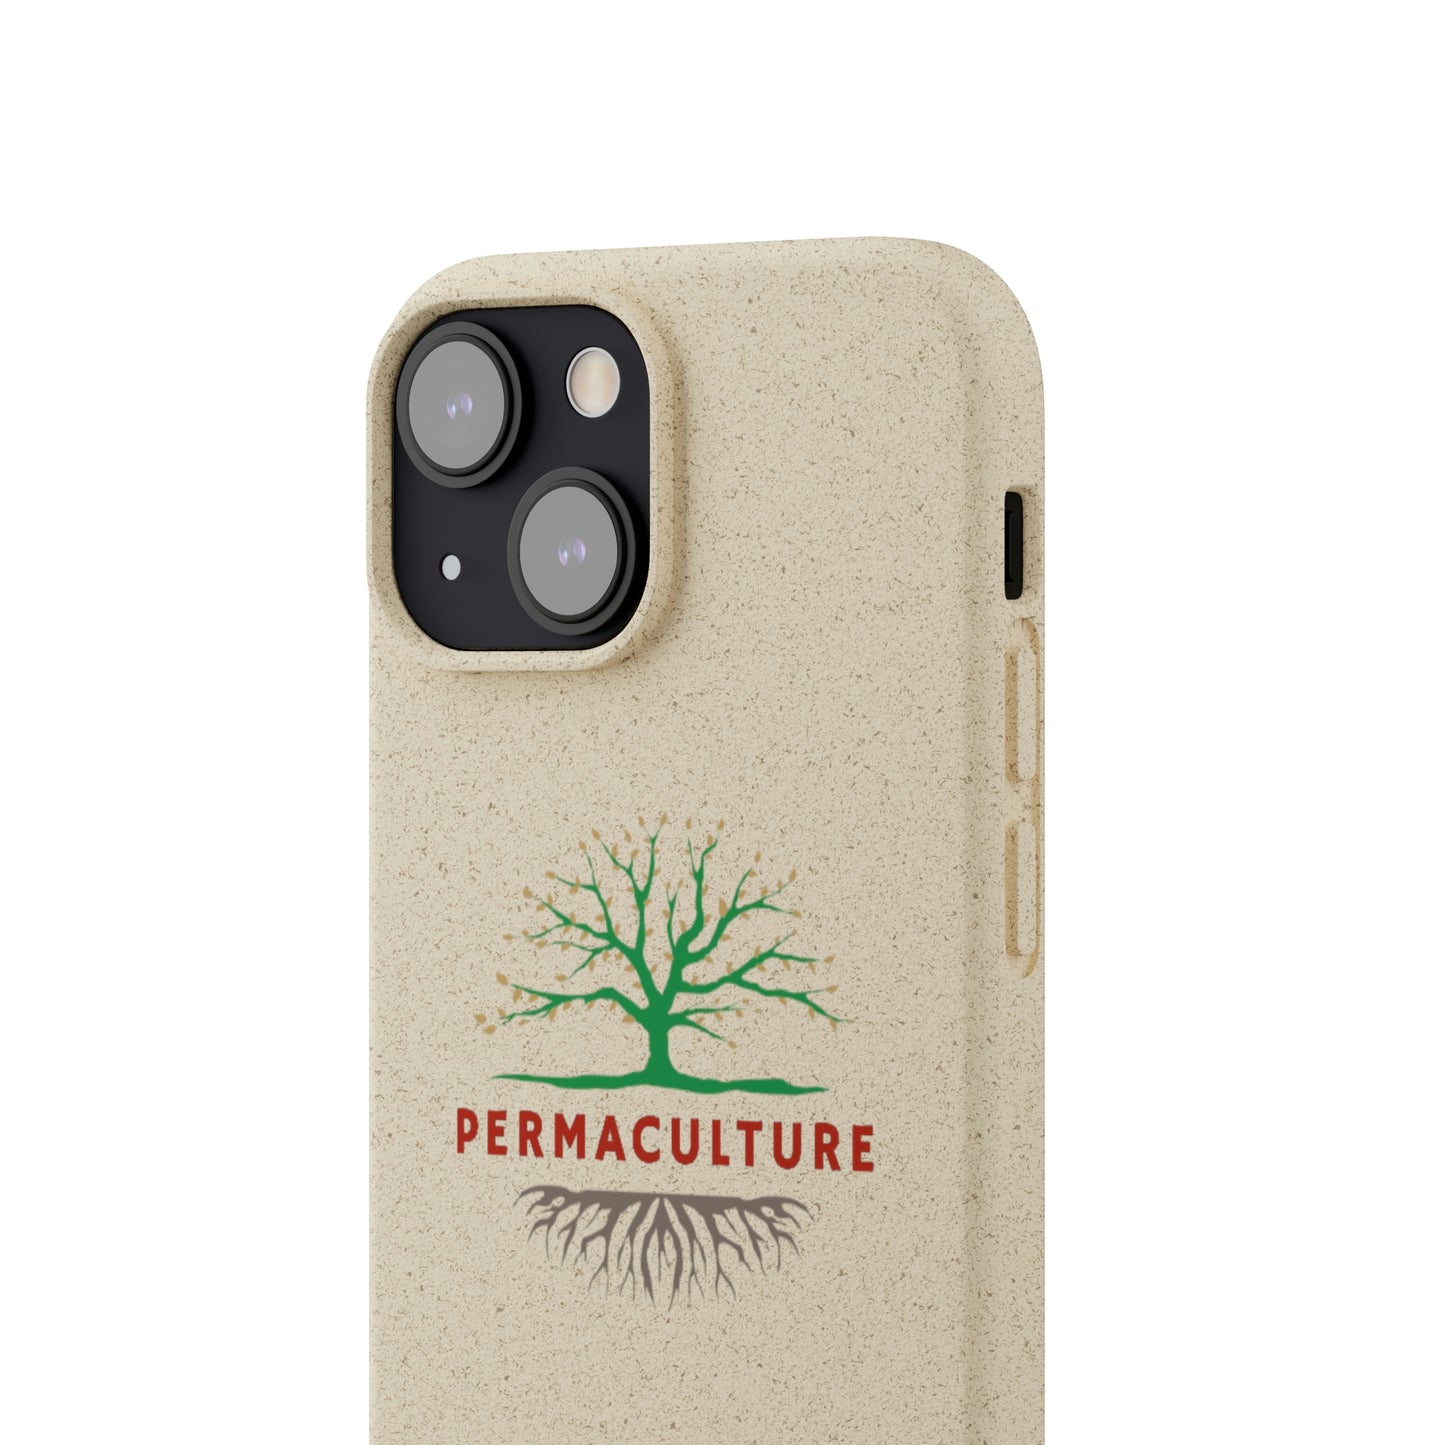 Biodegradable iPhone Cases - Permaculture